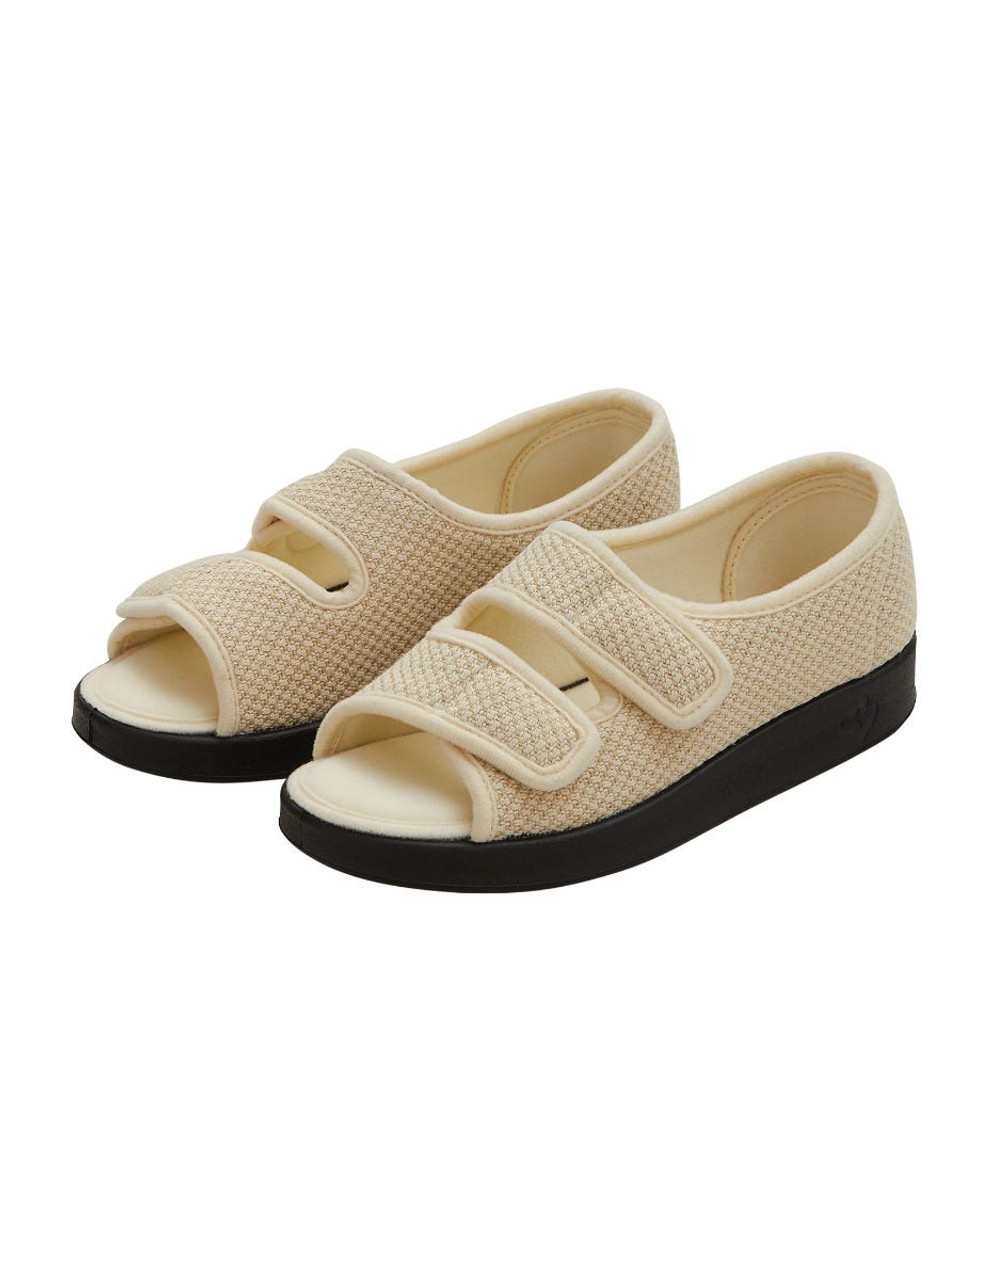 Silverts SV15370 Womens Easy Closure Sandal for Indoors & Outdoors Natural, Size=5, SV15370-SVNAB-5